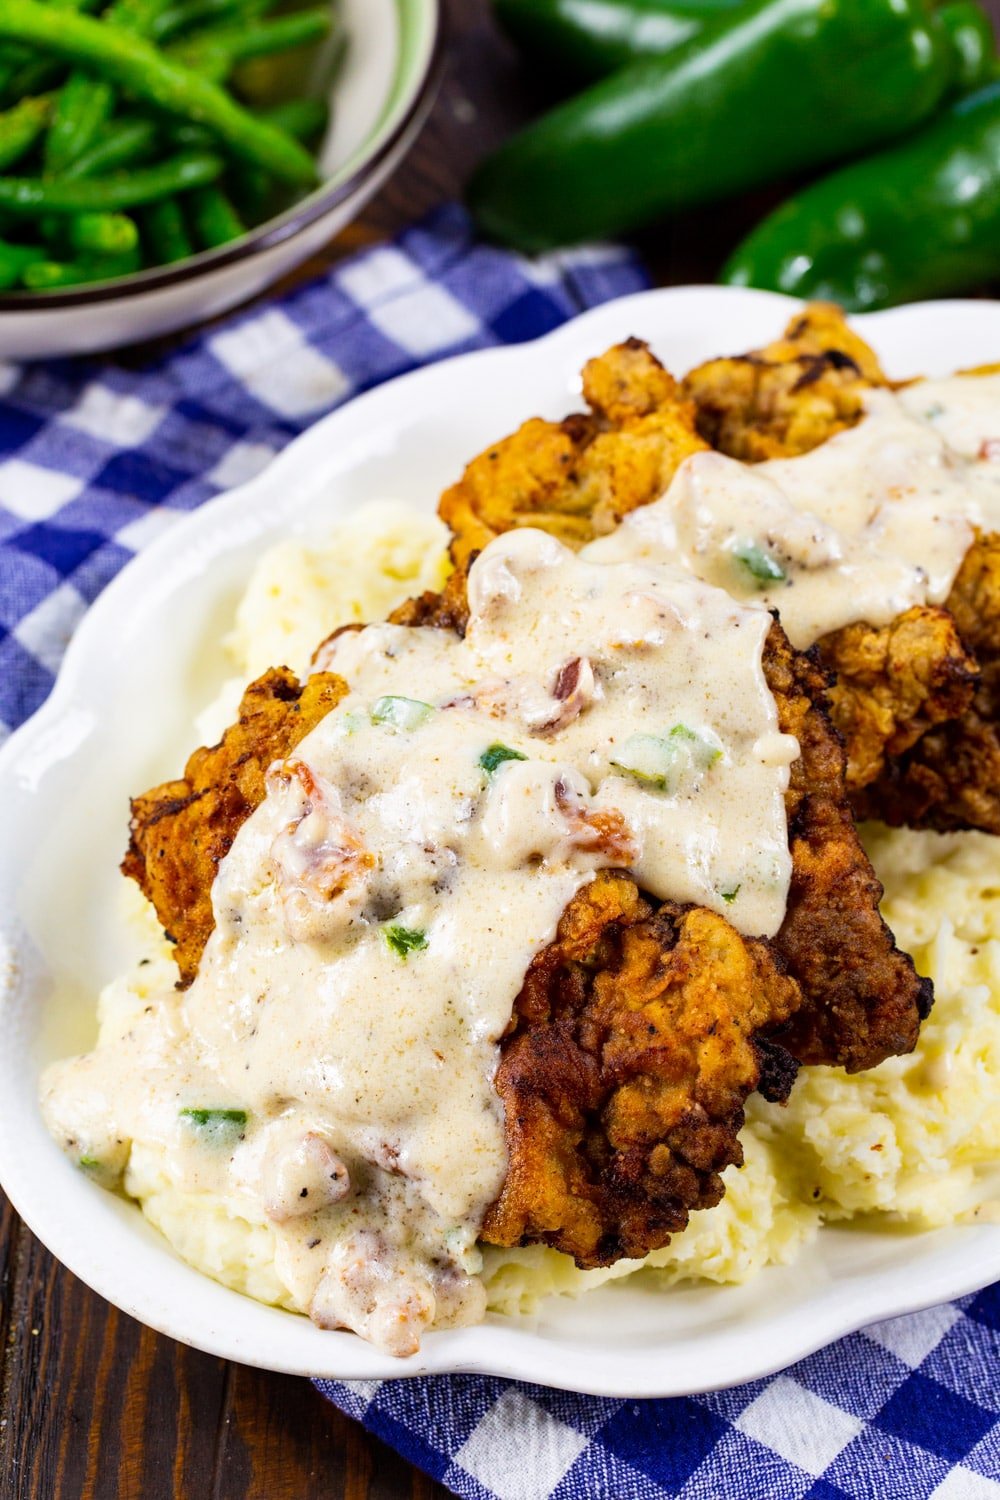 Chicken Fried Steak topped with gravy over mashed potatoes.